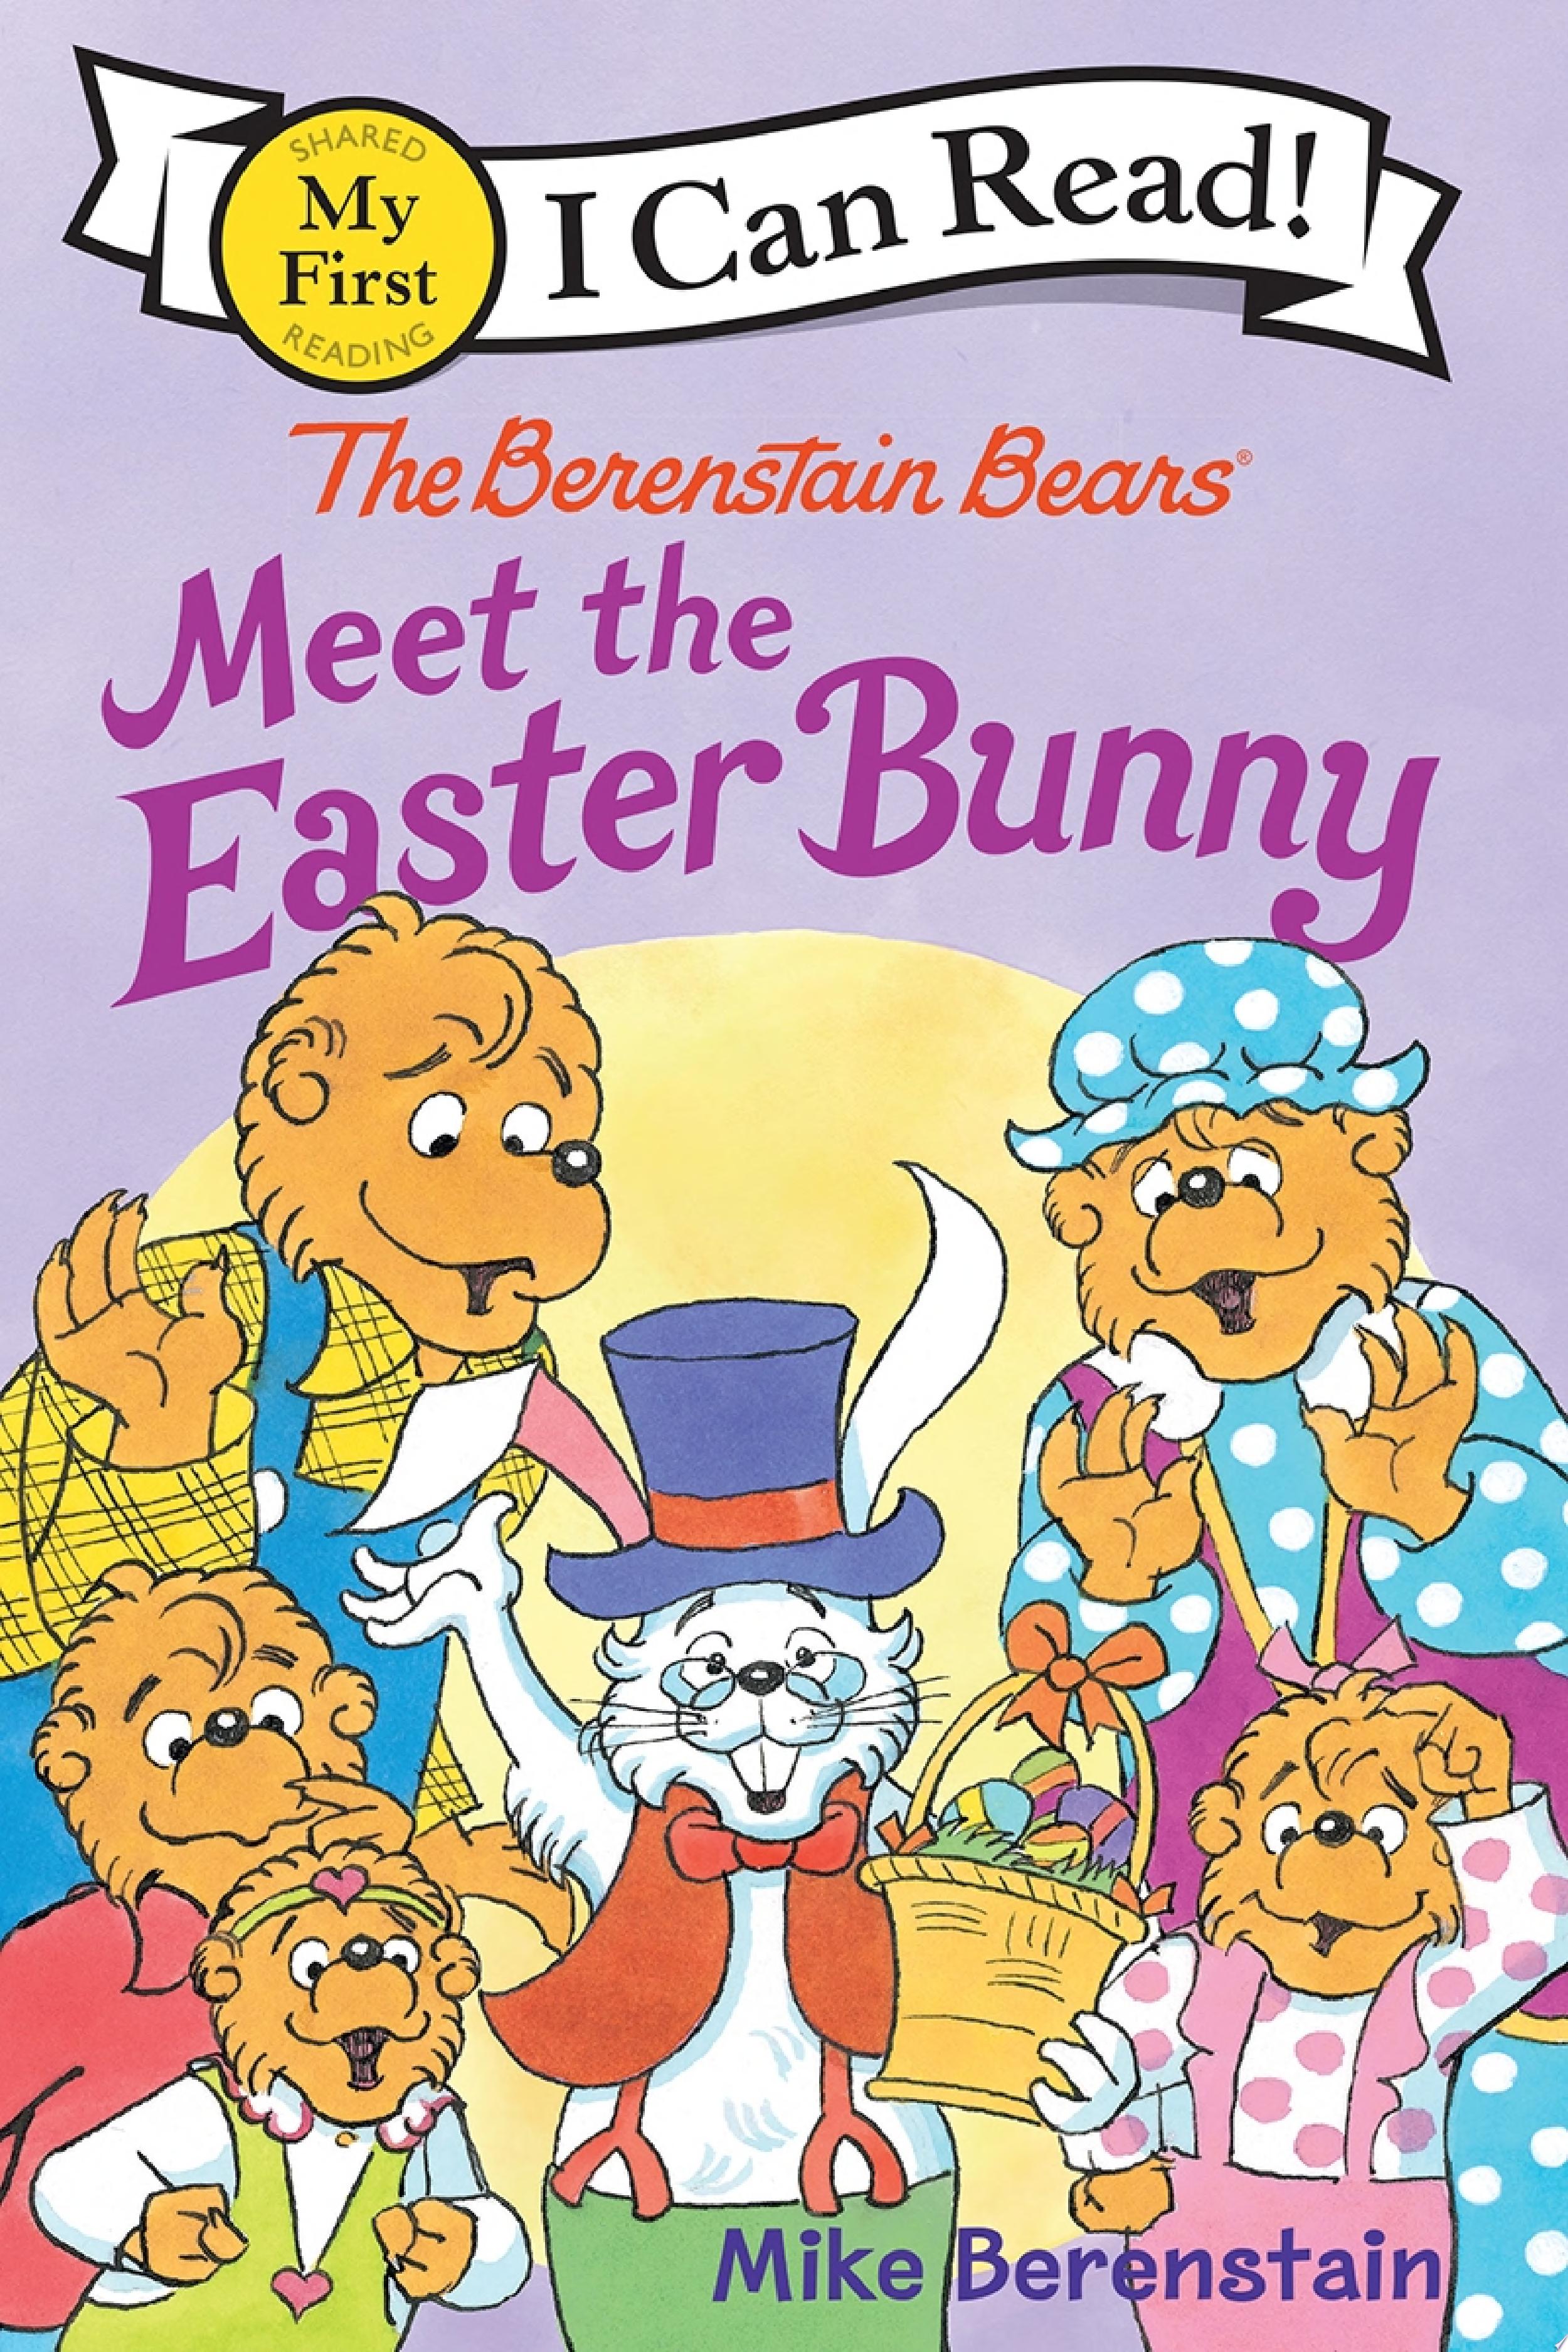 Image for "The Berenstain Bears Meet the Easter Bunny"